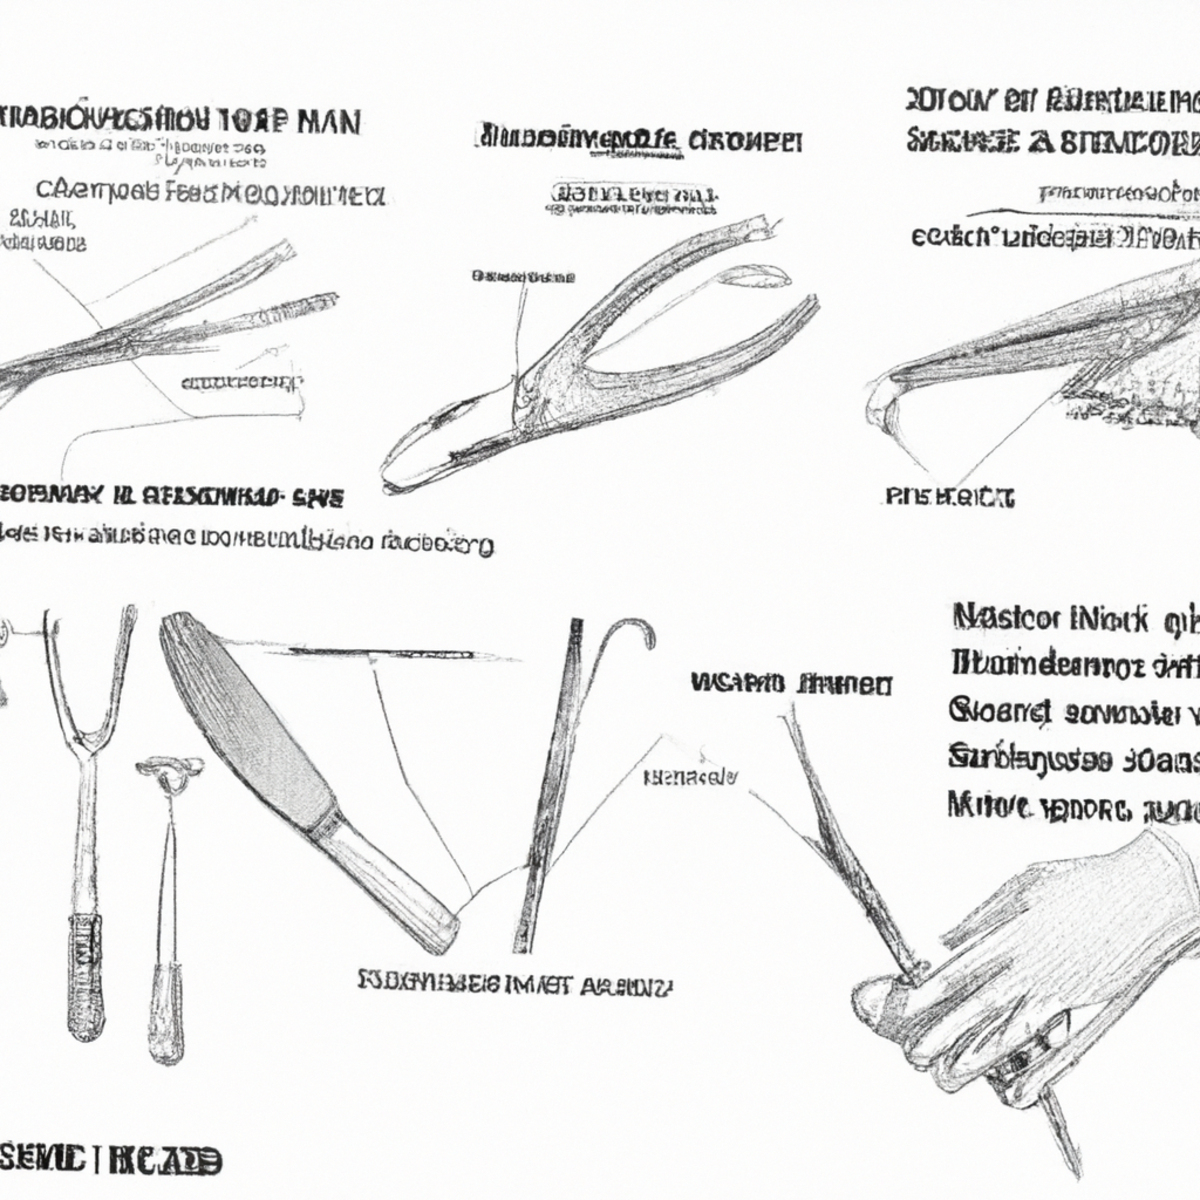 Sterile surgical tools symbolize the enigmatic nature of Gallbladder Carcinoid Tumor, inviting readers to unravel its complexity.